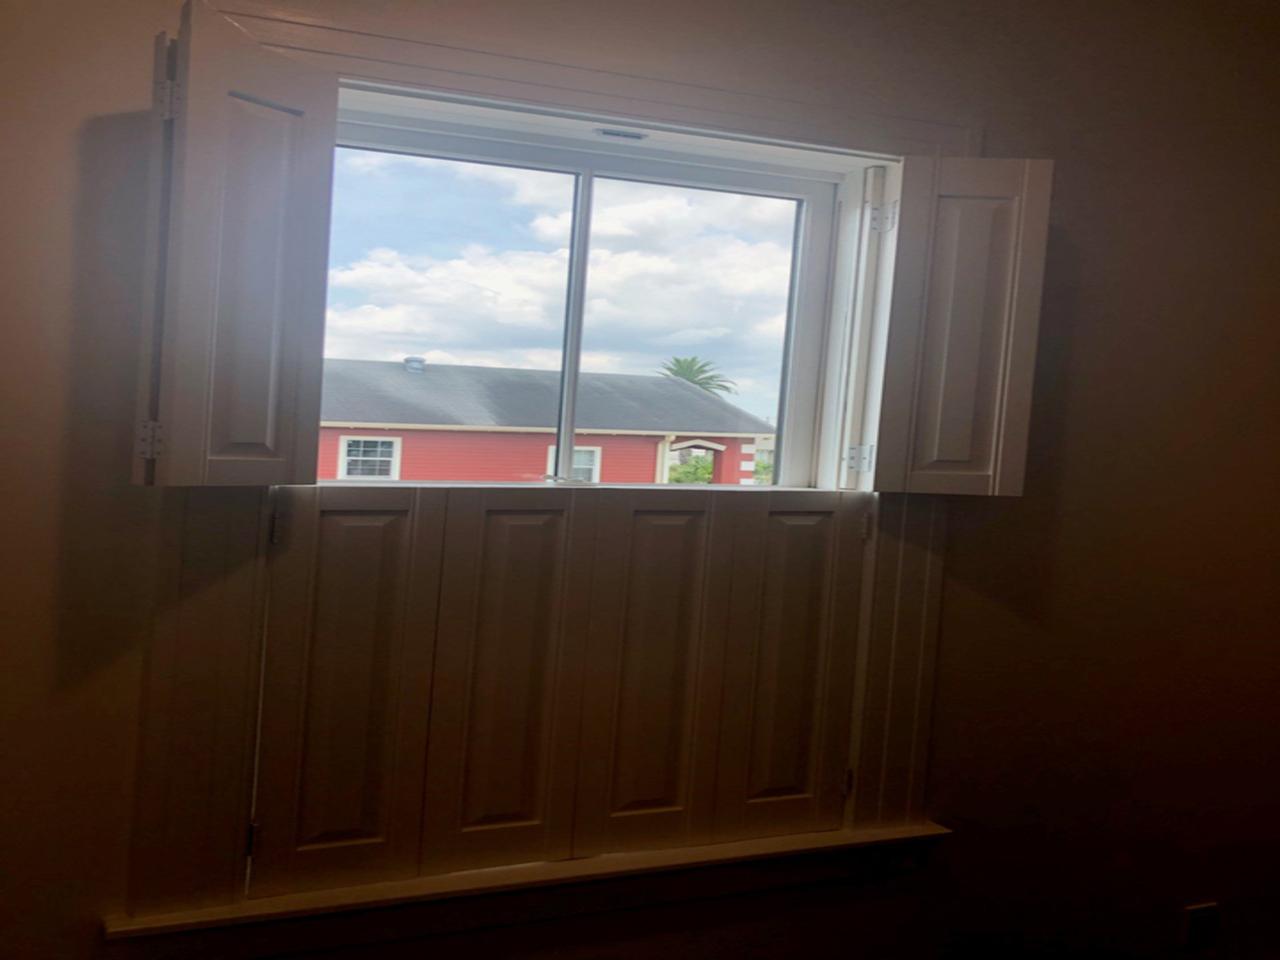 Raised panel shutters on a window with top shutters opened